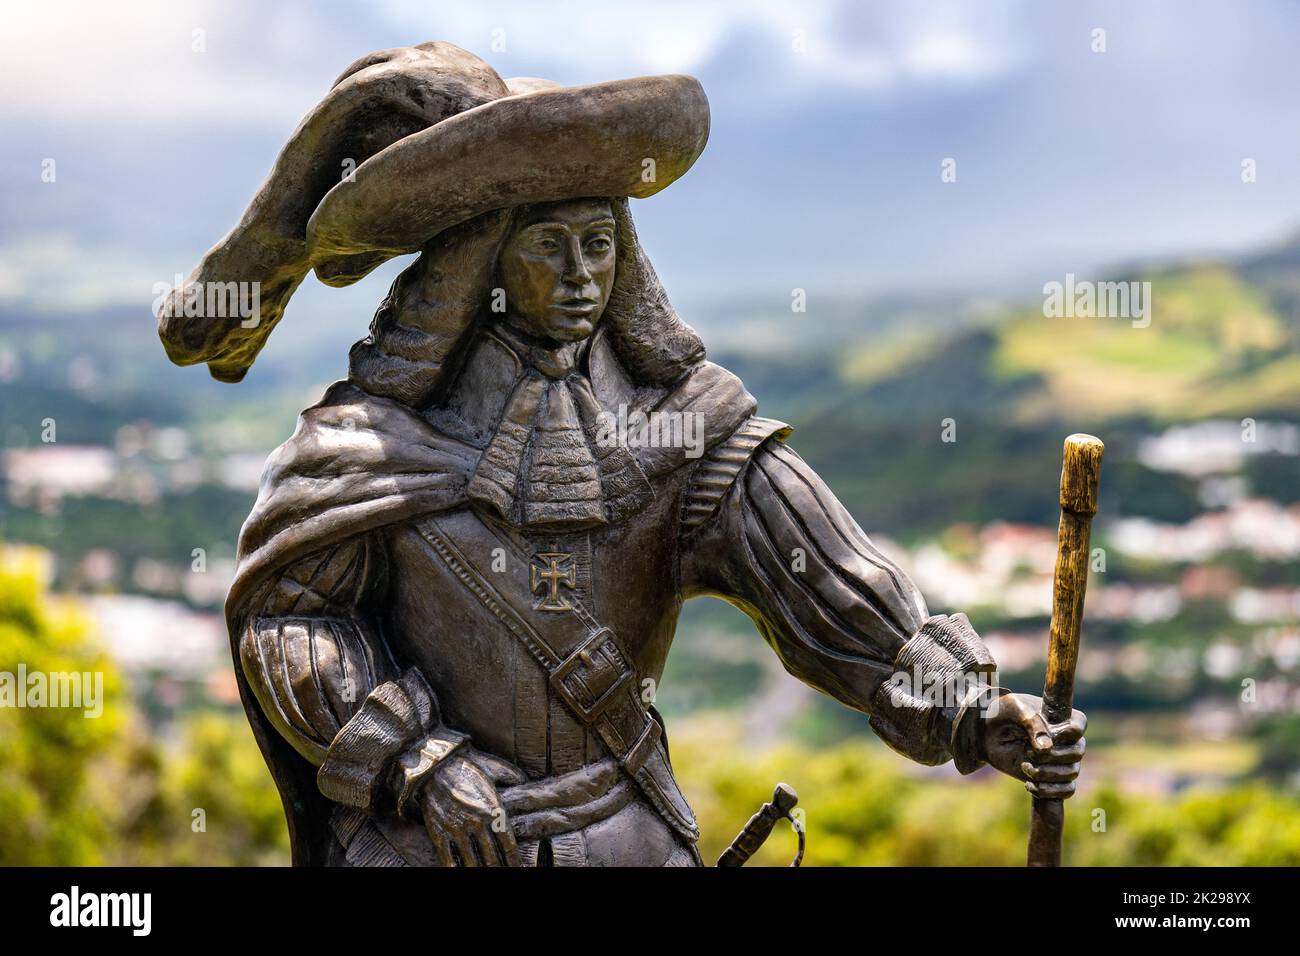 Statue of Afonso VI Second King of Portugal on Monte Brasil in Angra do Heroismo, Terceira Island, Azores, Portugal. Stock Photo